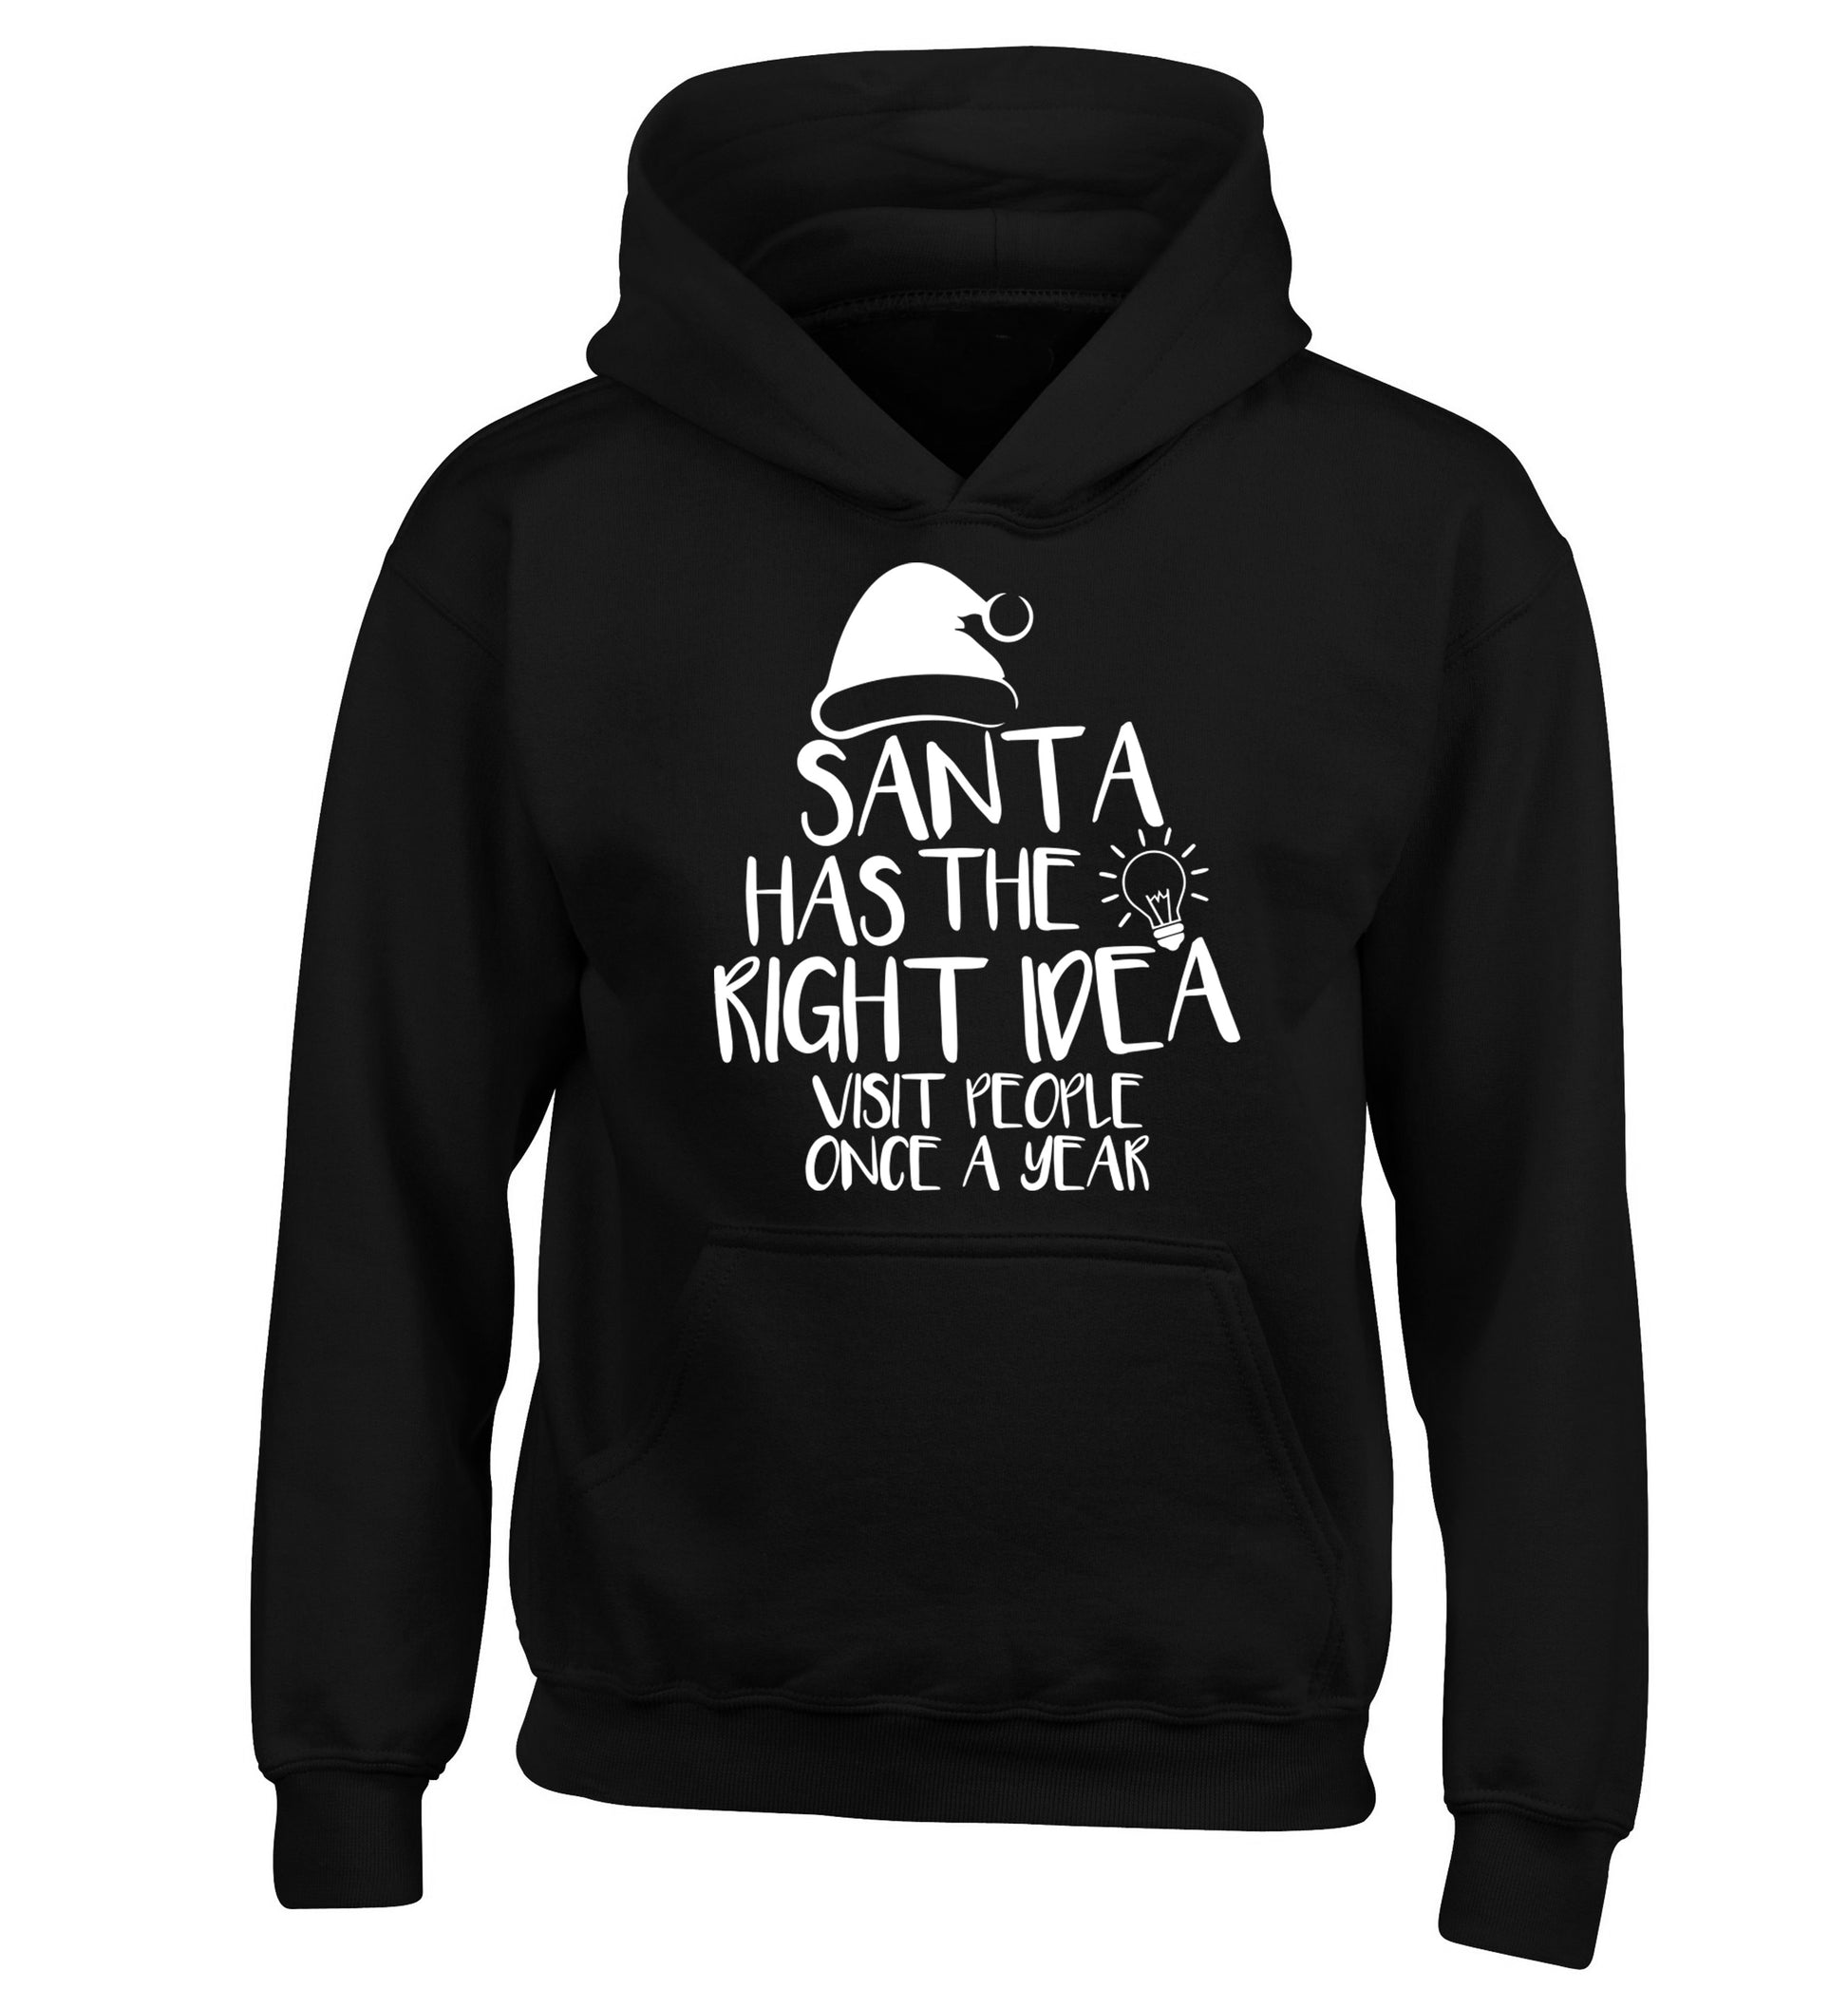 Santa has the right idea visit people once a year children's black hoodie 12-14 Years